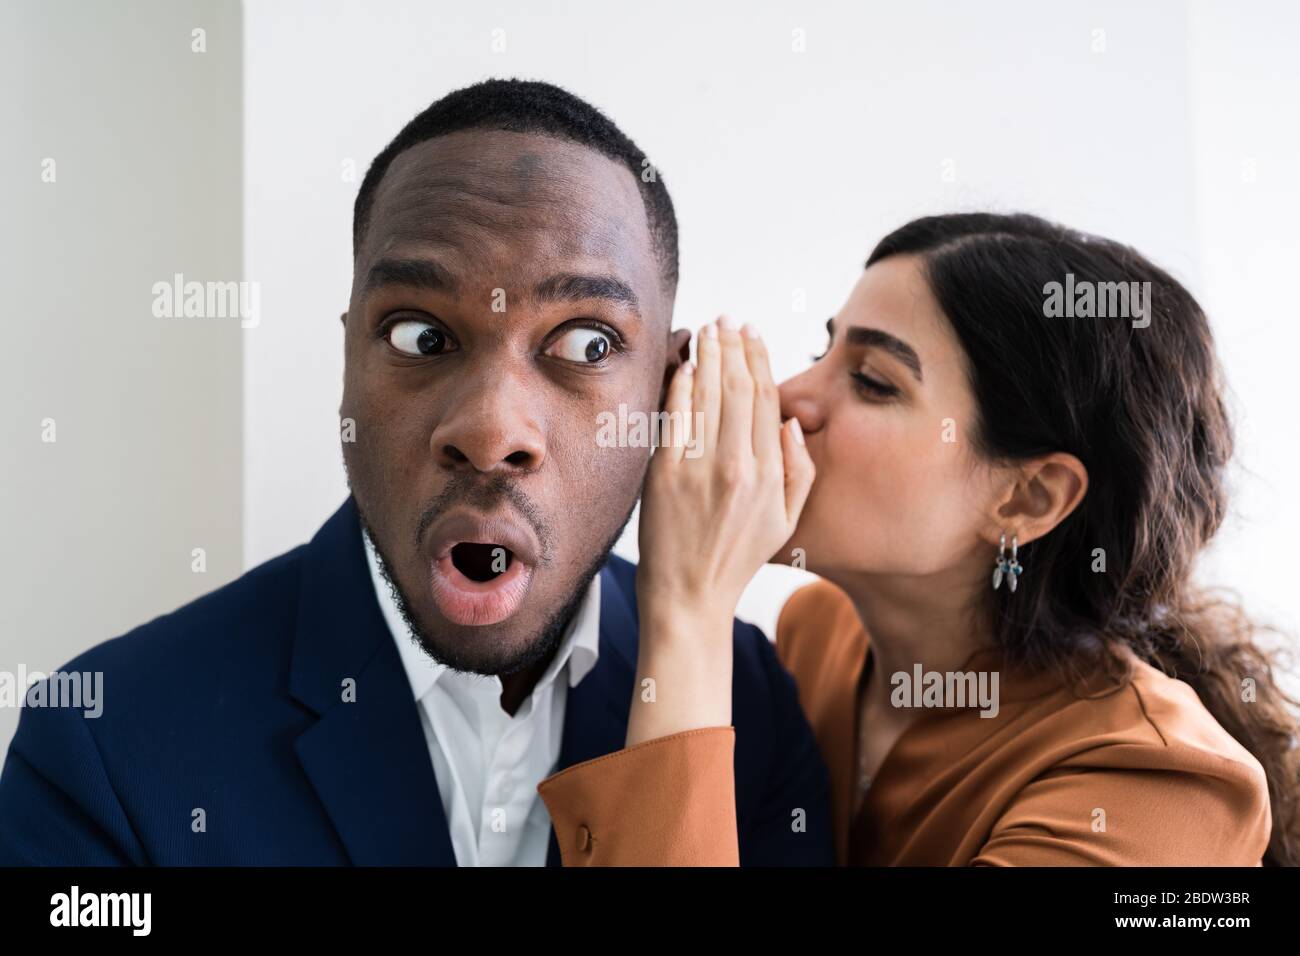 Portrait Of Happy Woman Whispering Secret Or Interesting Gossip To Handsome Man In His Ear Stock Photo Alamy